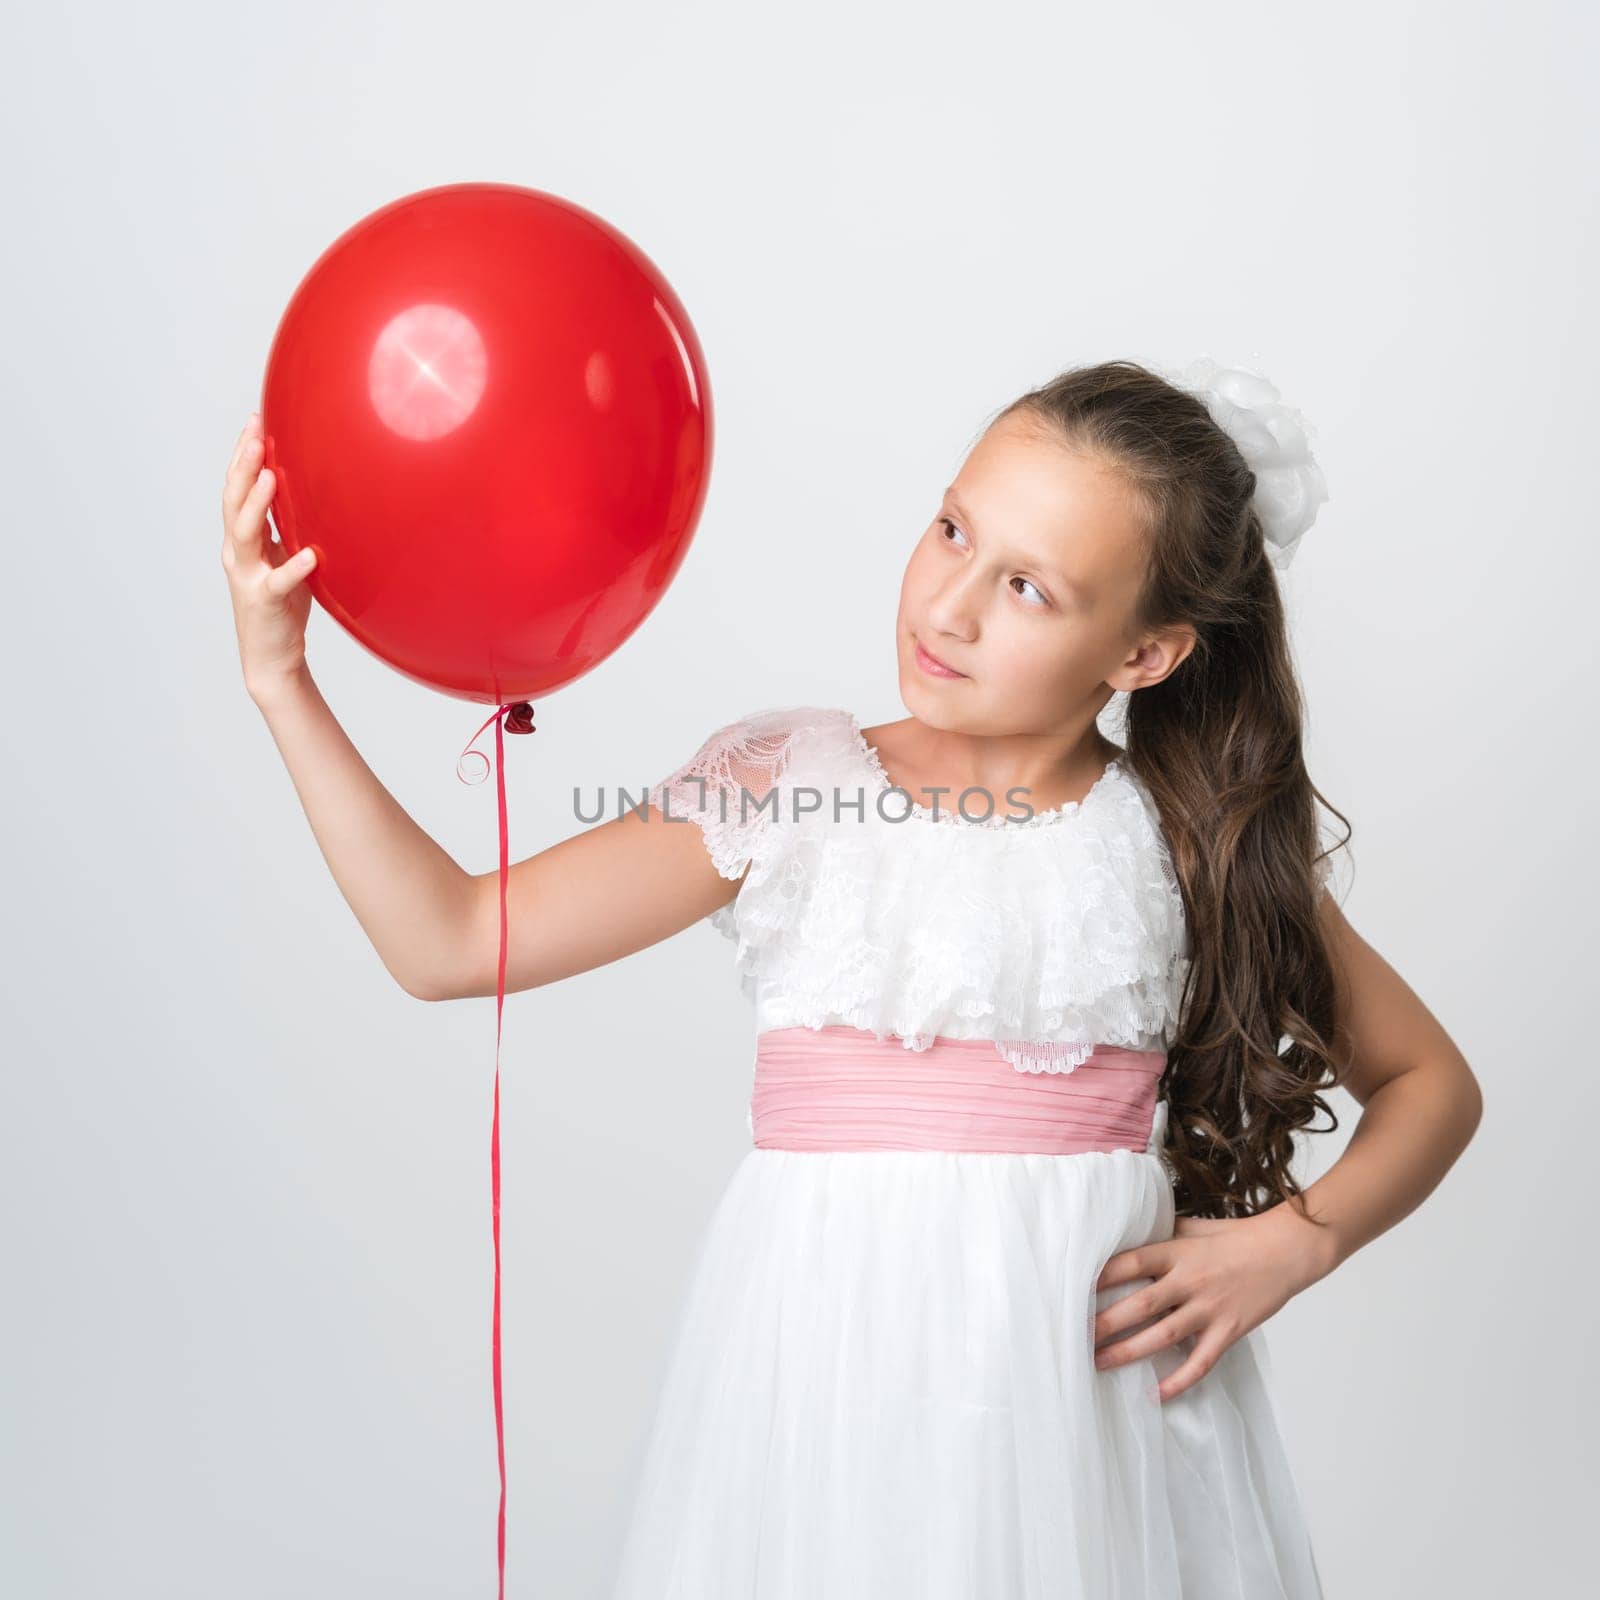 Portrait of girl in white dress holding one red balloon in hand and looking at balloon. Studio shot by Alexander-Piragis